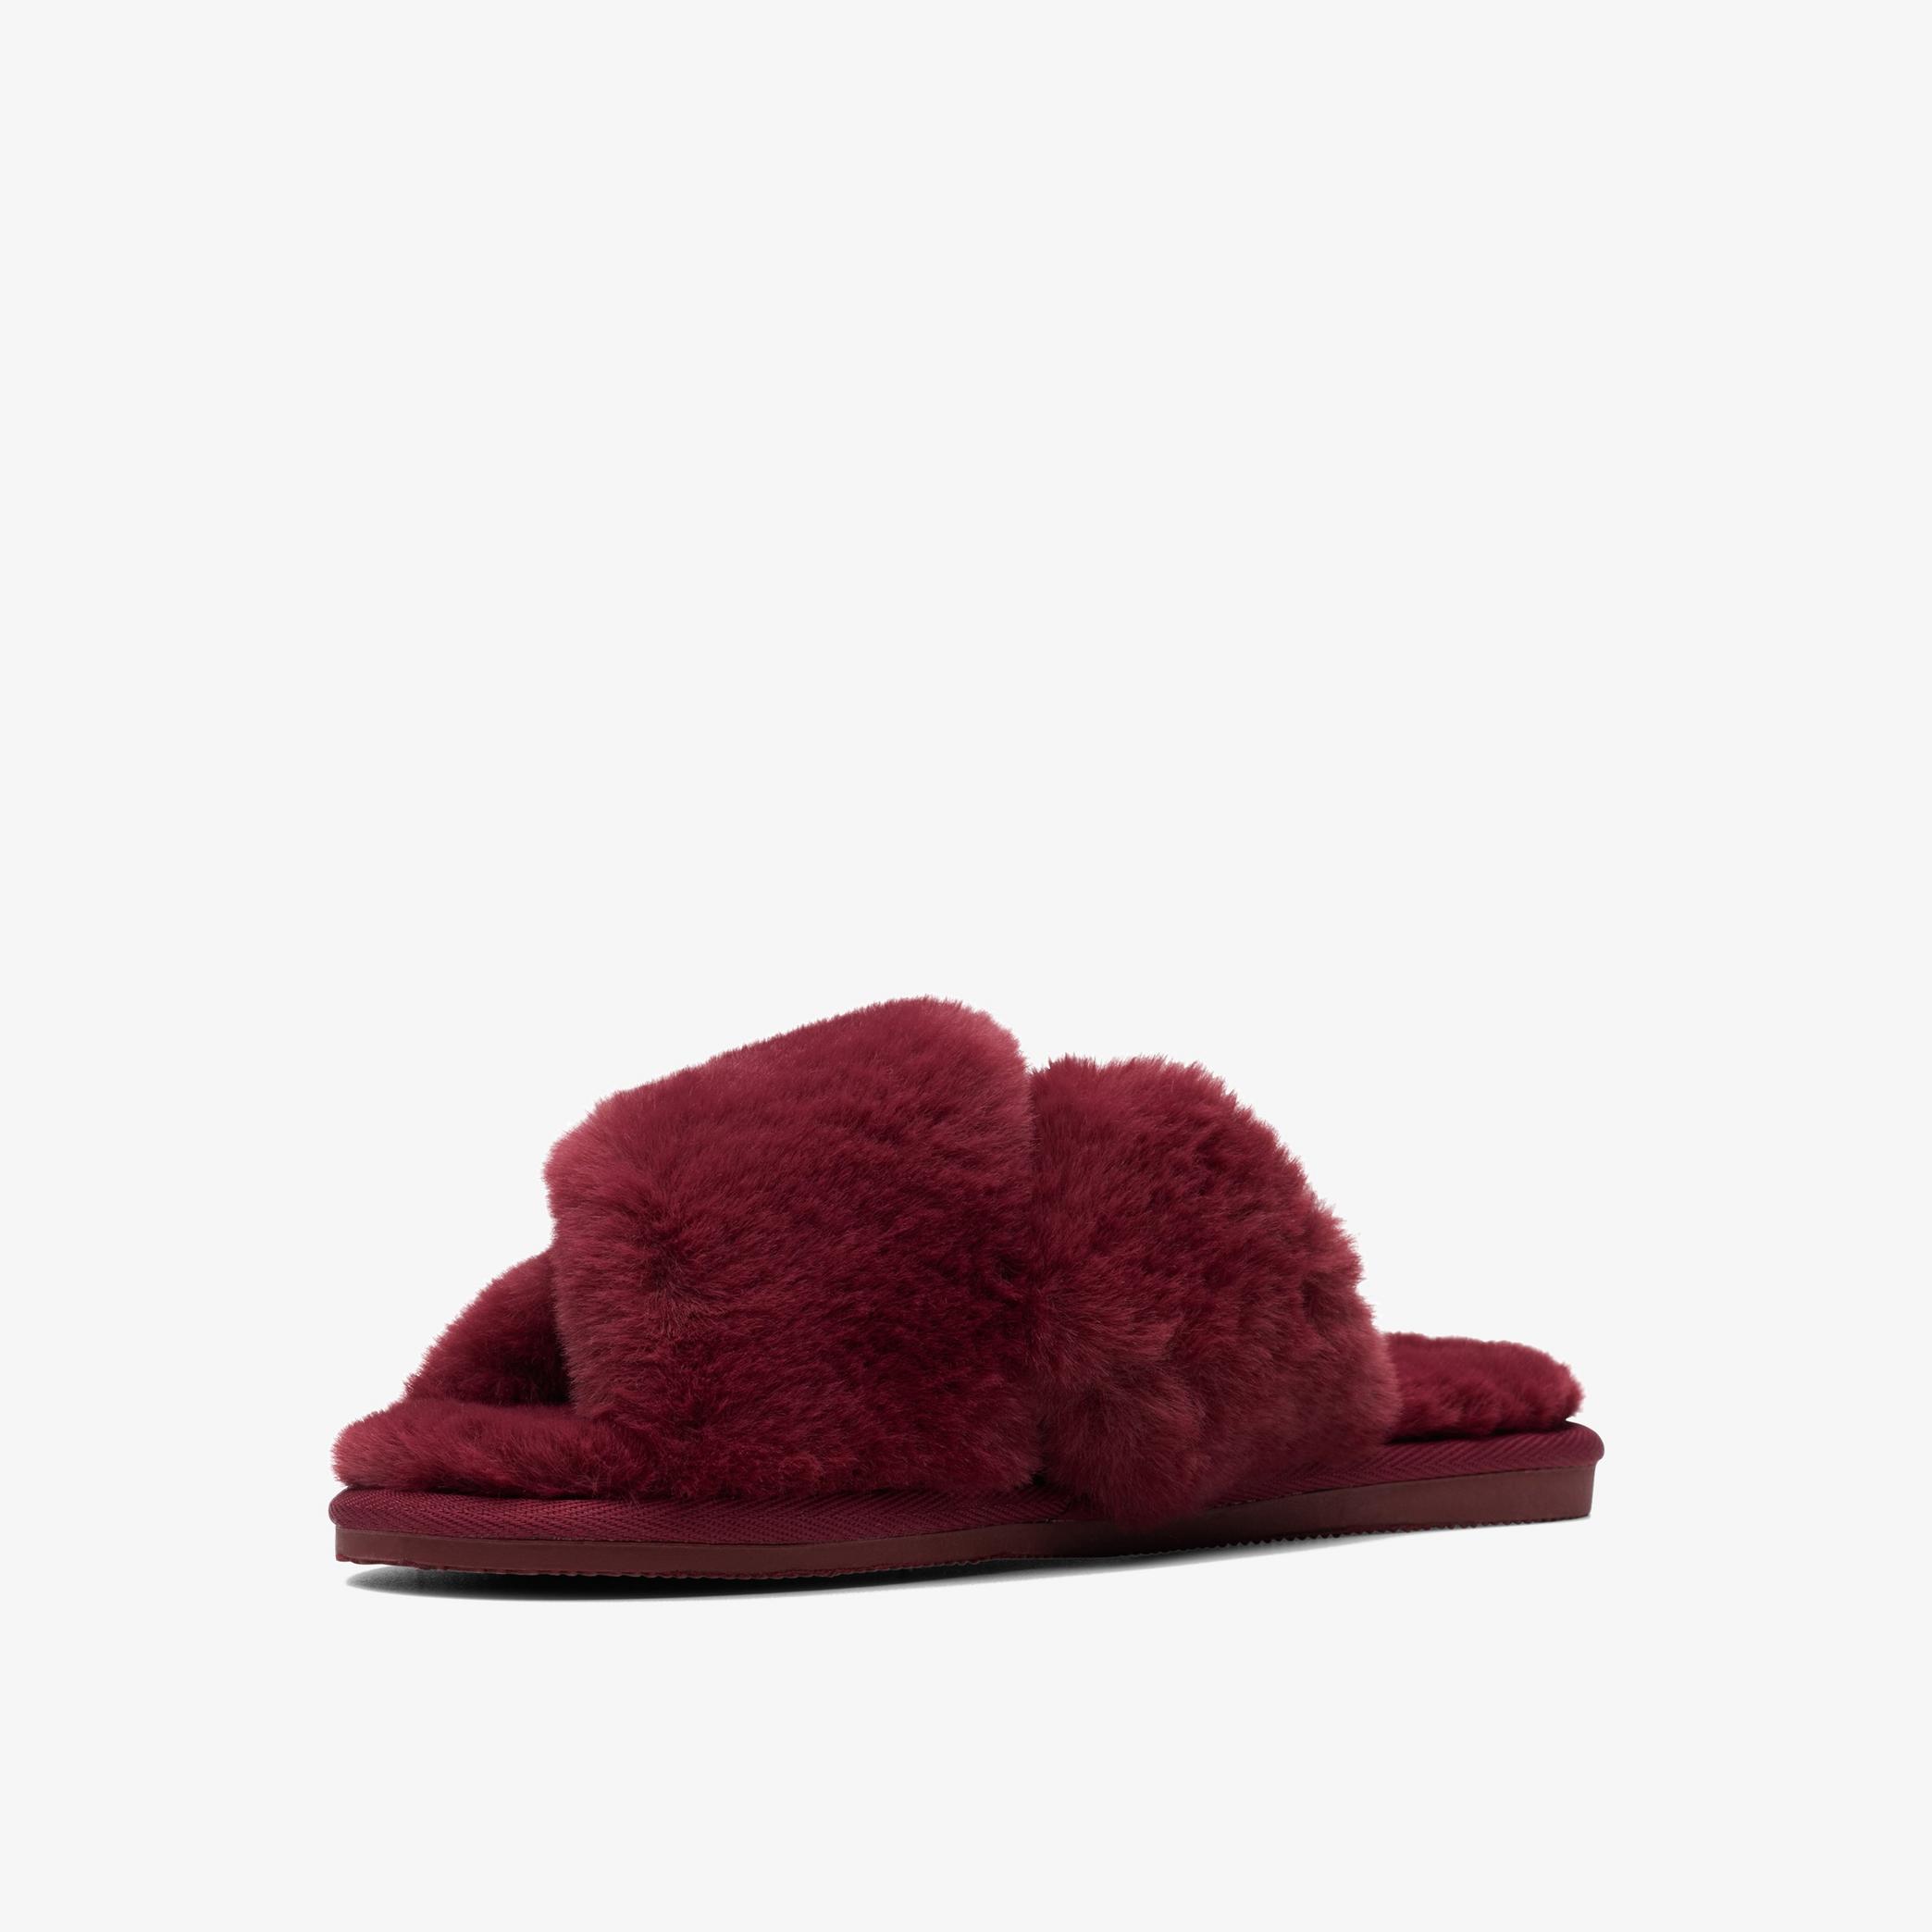 Dream Lux Merlot Slippers, view 4 of 6